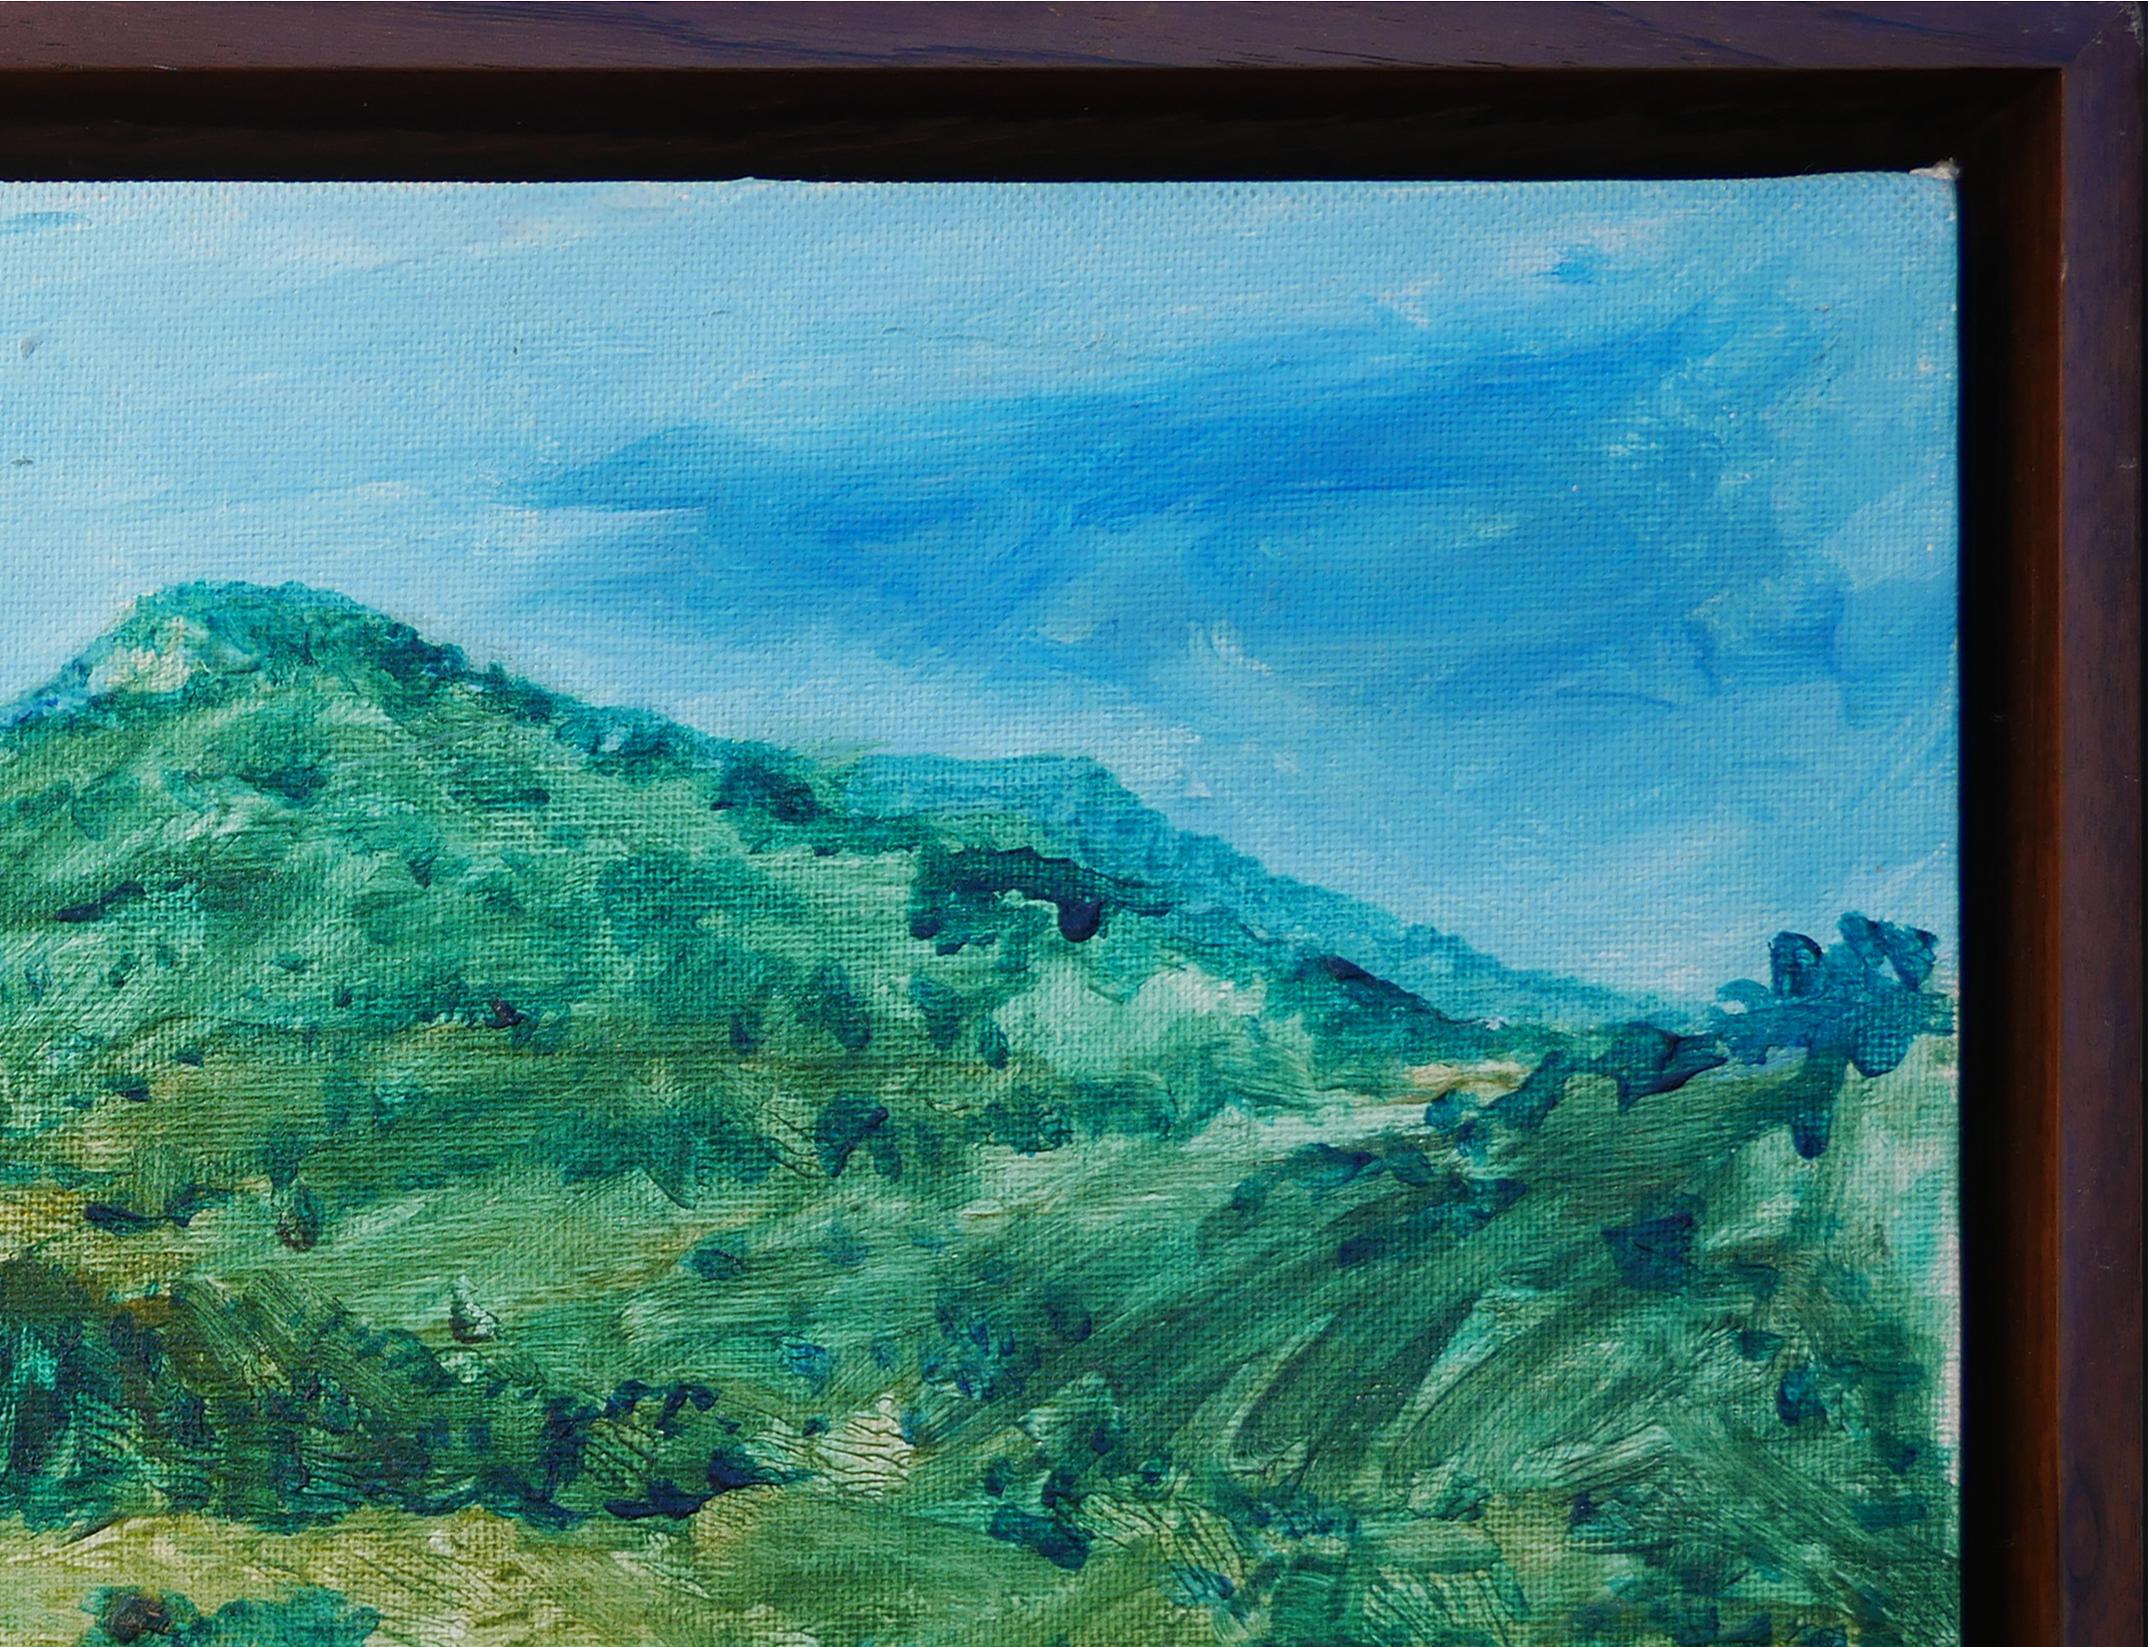 Green and blue-toned landscape painting by Houston, TX artist Earl Staley. This painting depicts a dense, green forest with a mountain in the center background. Signed and dated at bottom right corner. Currently hung in a thin brown floating frame.